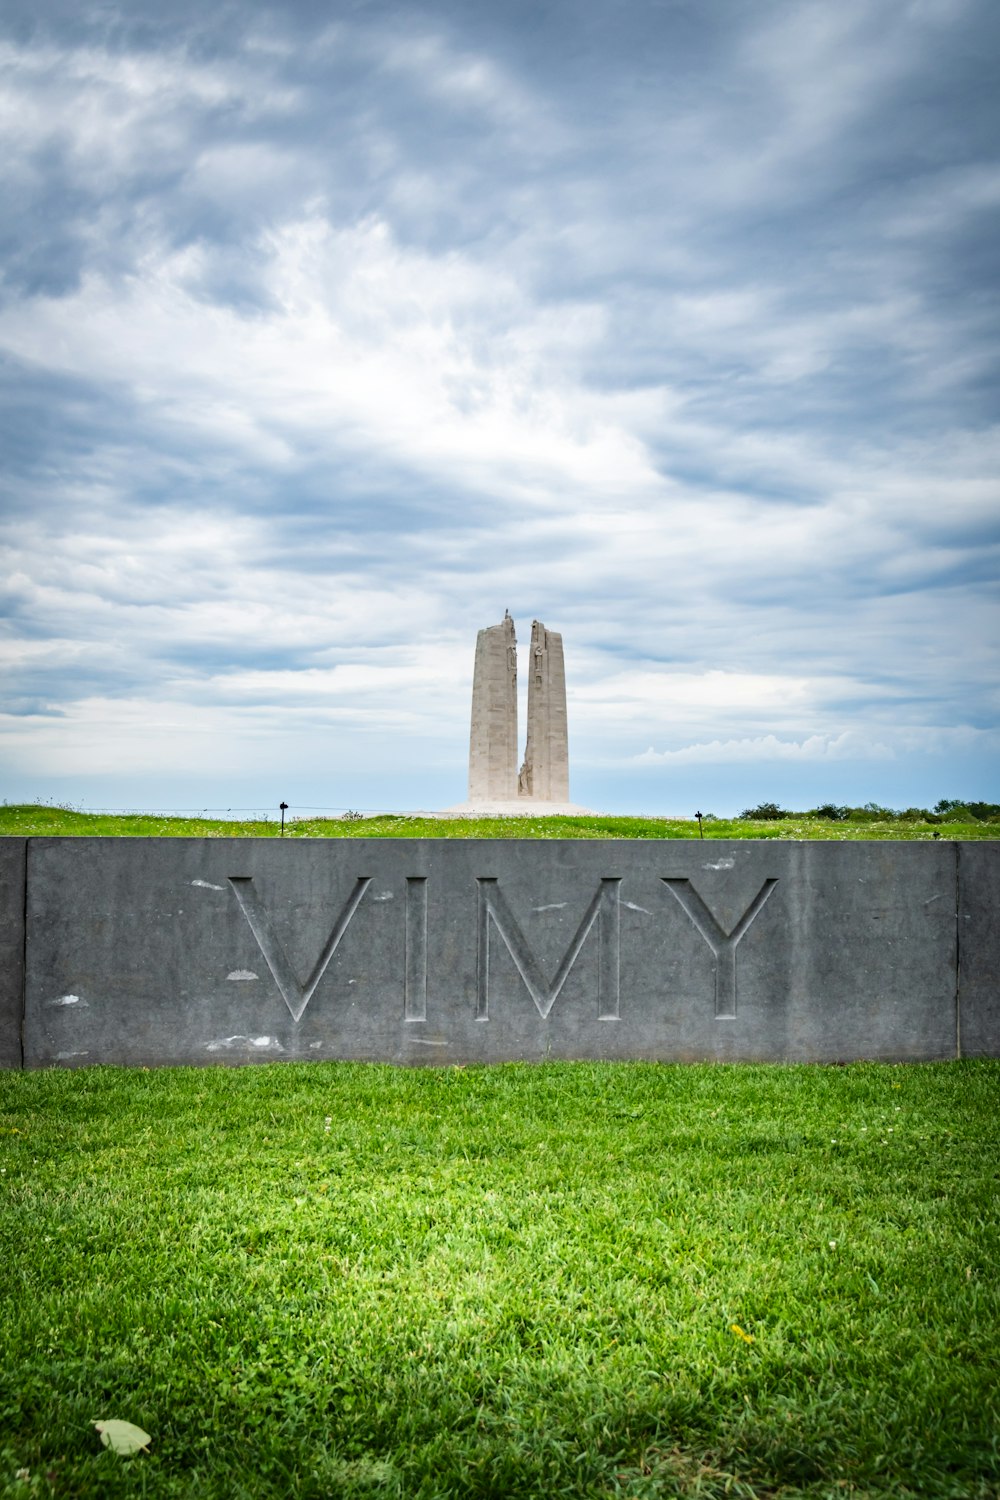 a monument with the word vimy written on it